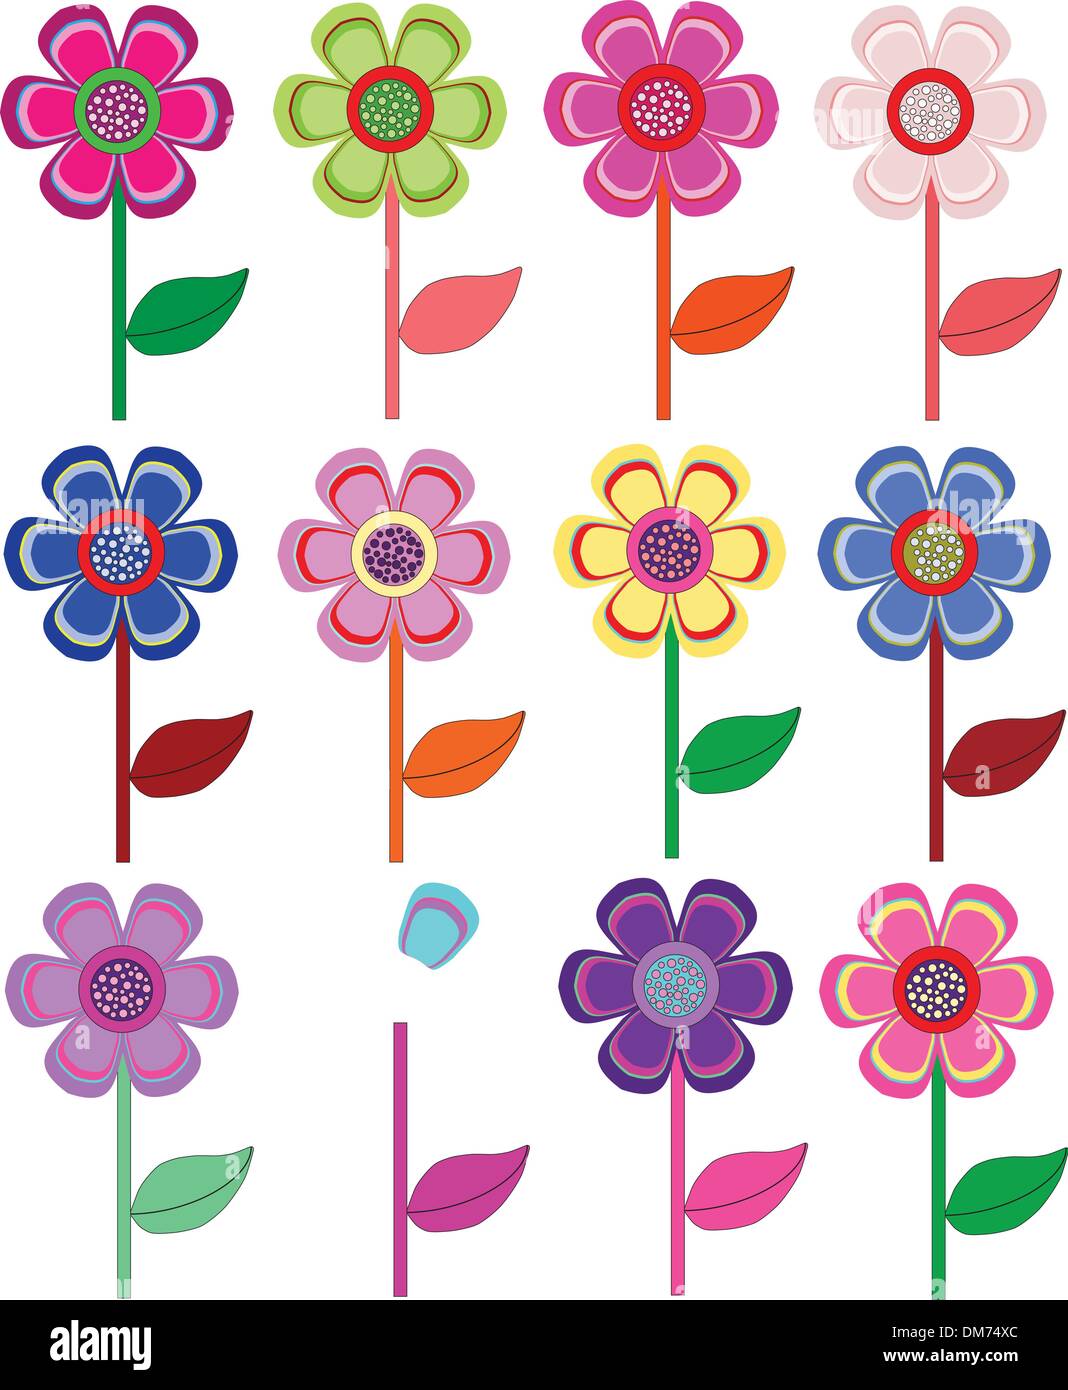 Set of flowers in different shapes, color. Stock Vector